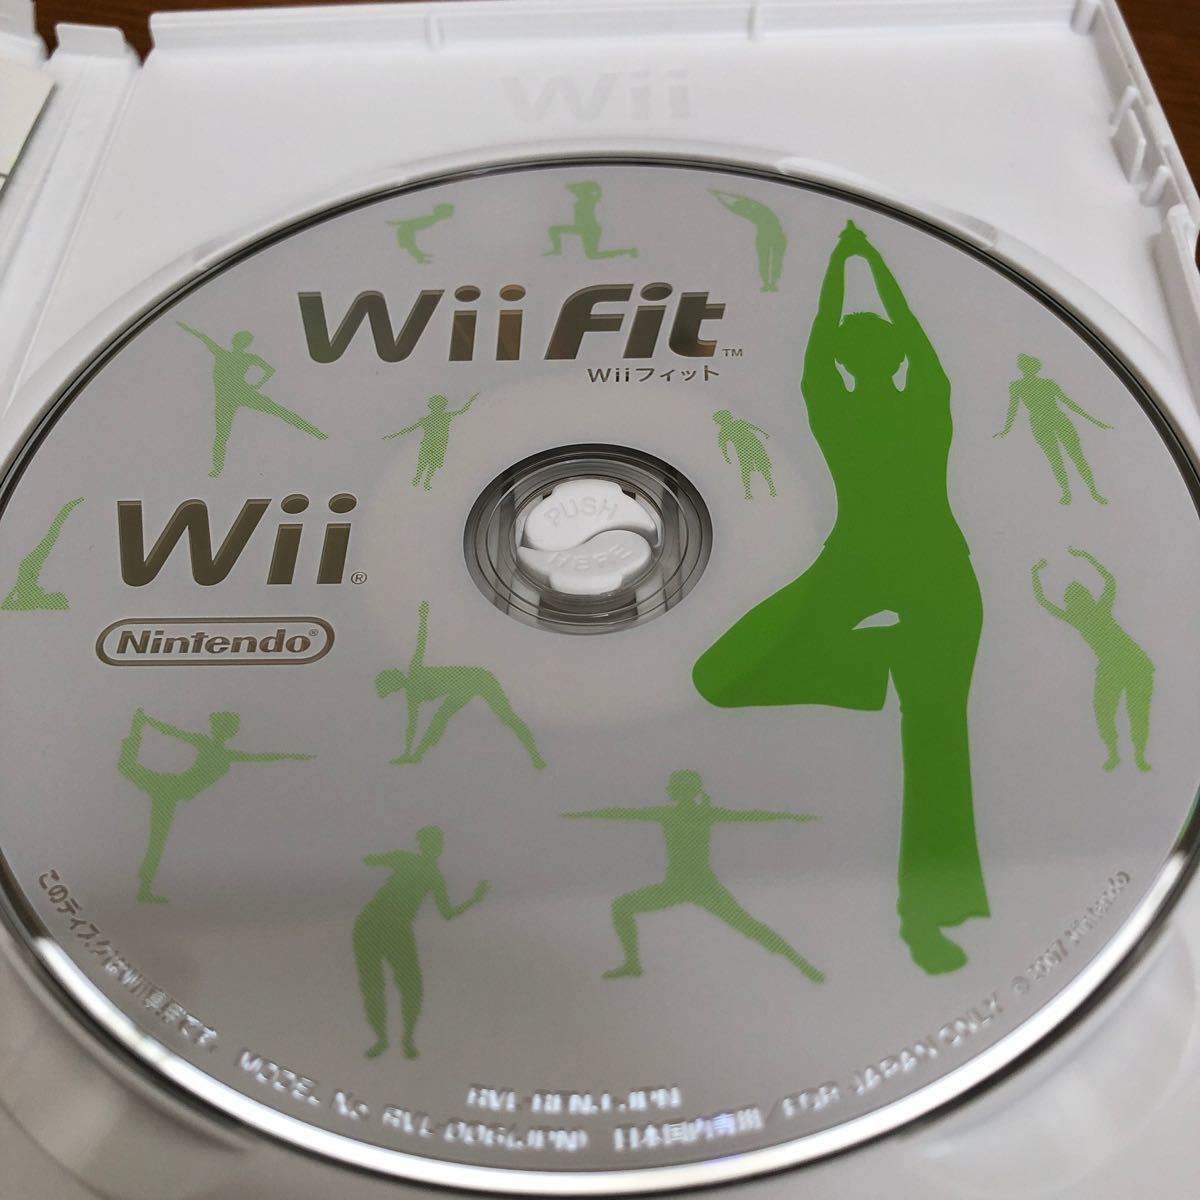 Wii Fit & Wii Fit Plus